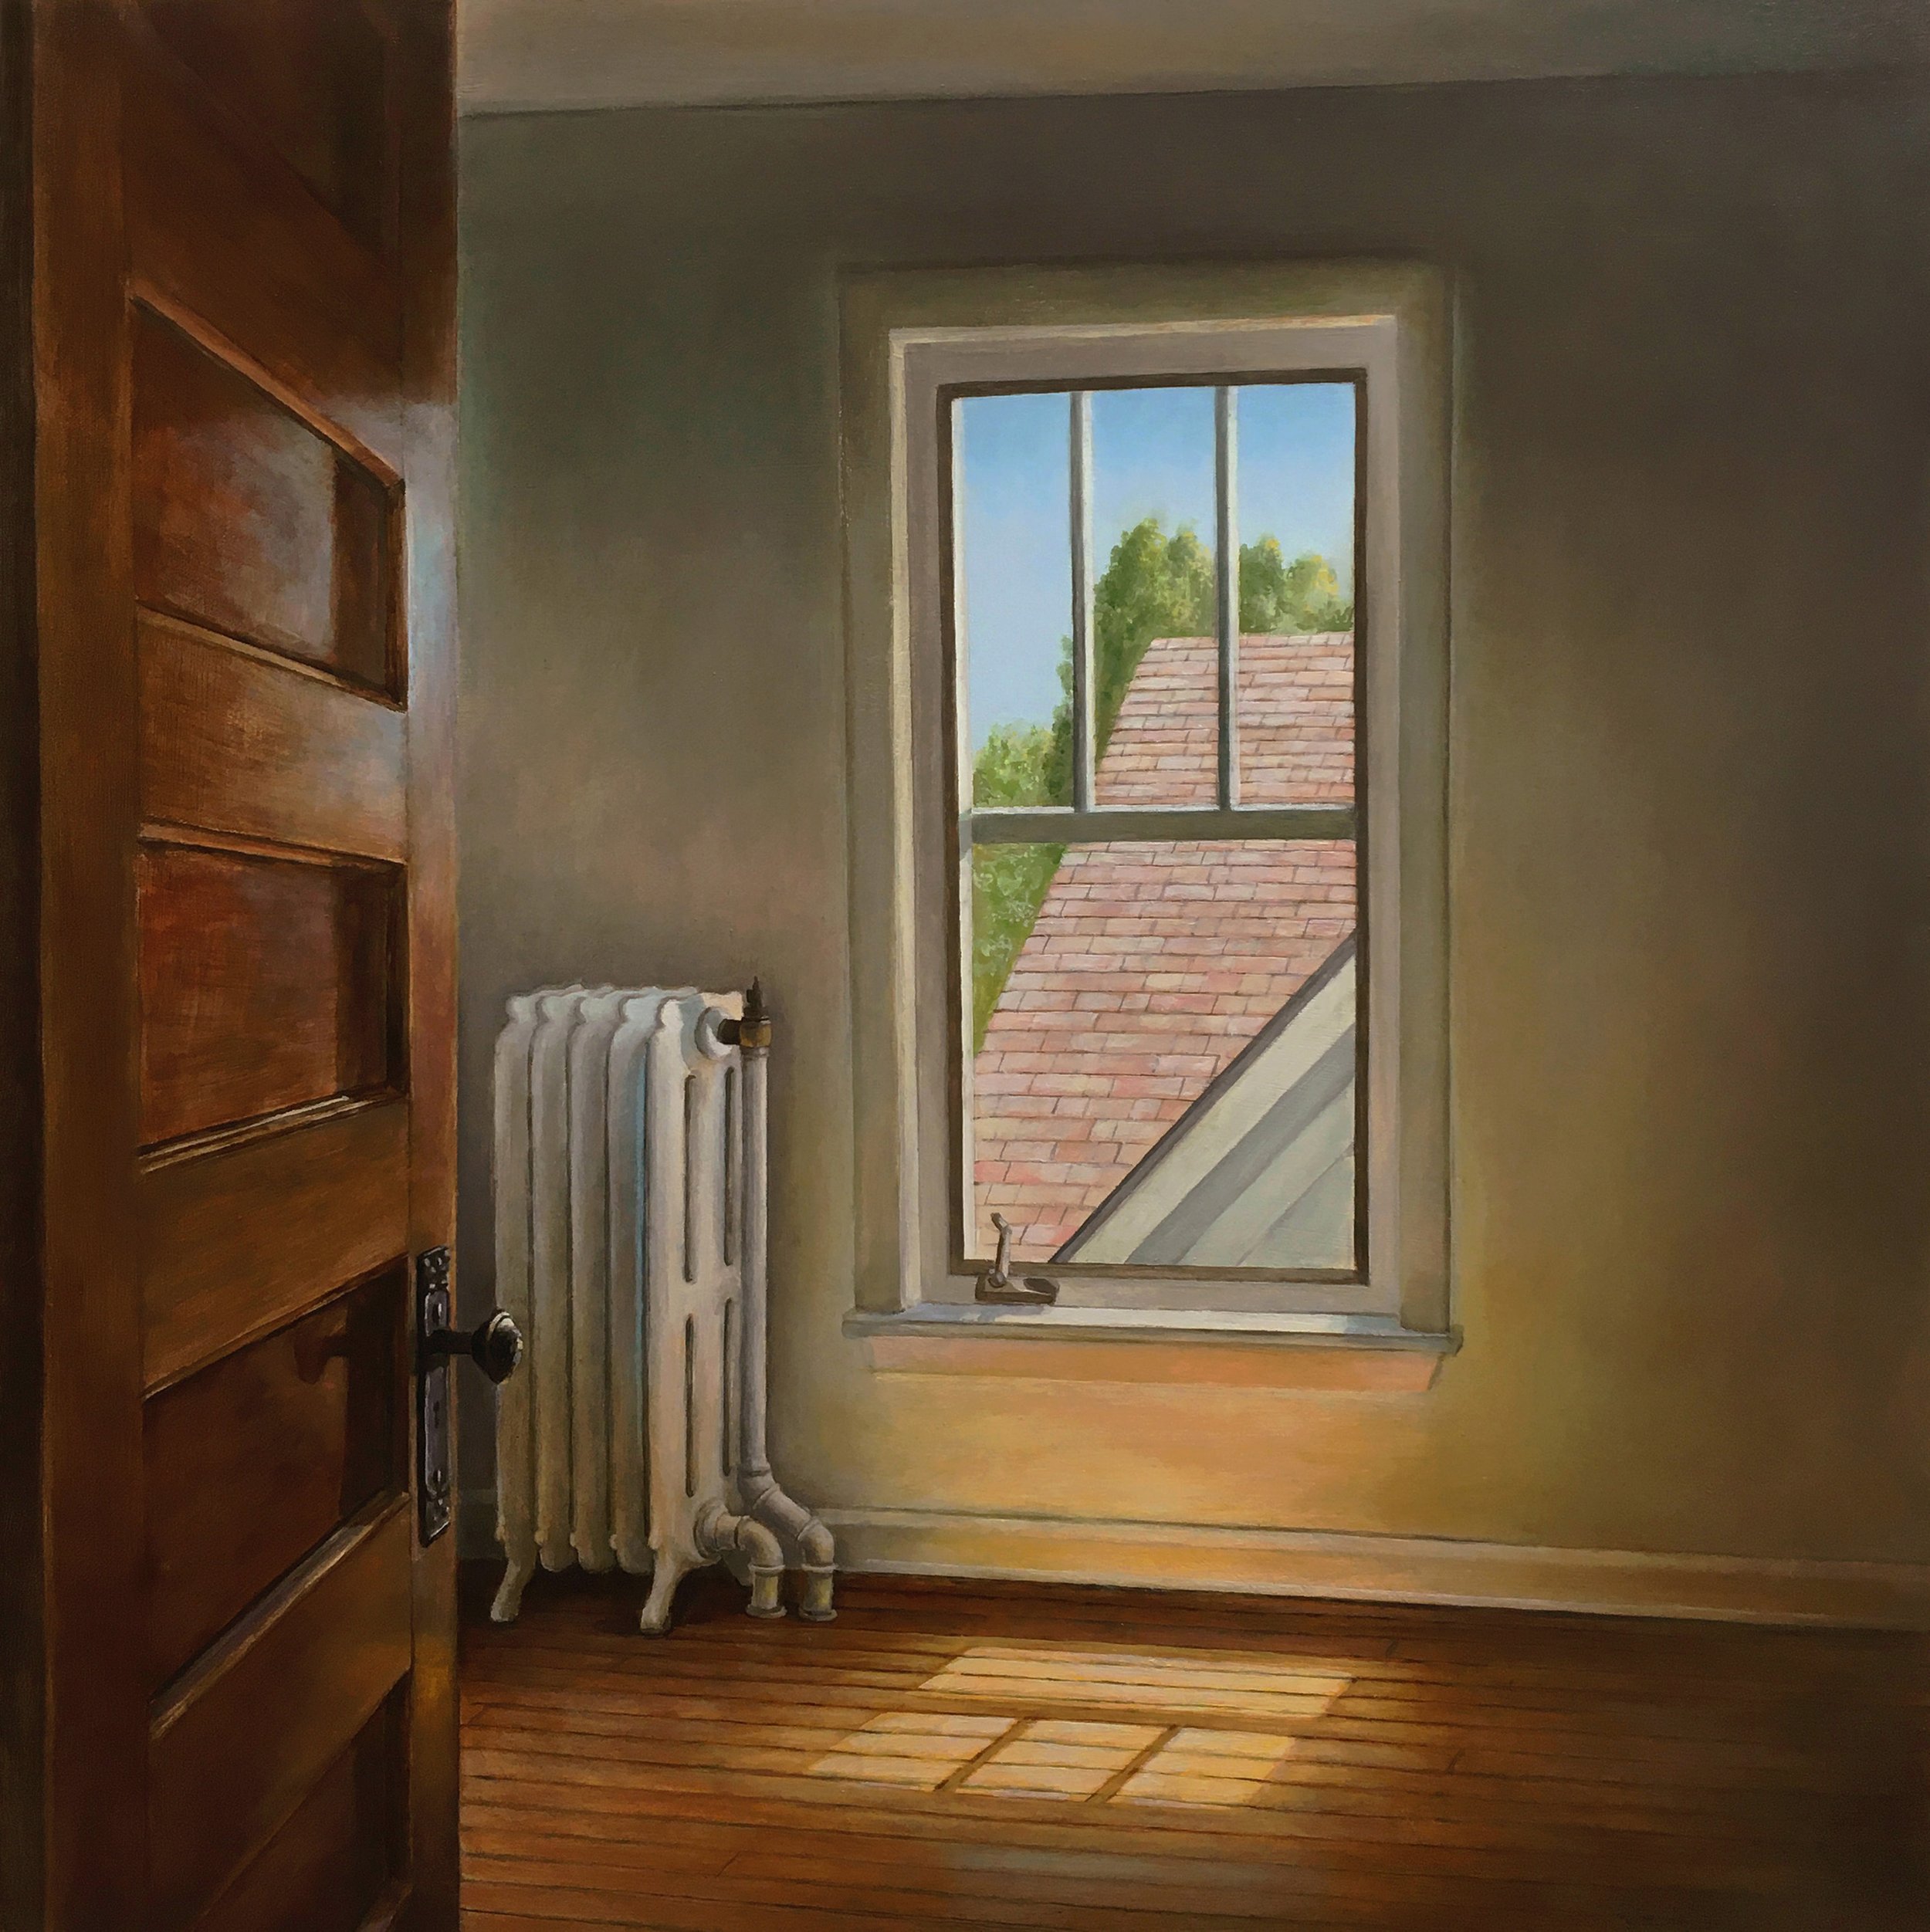   Summer Light   2021  Oil on panel  16 x 16 inches   